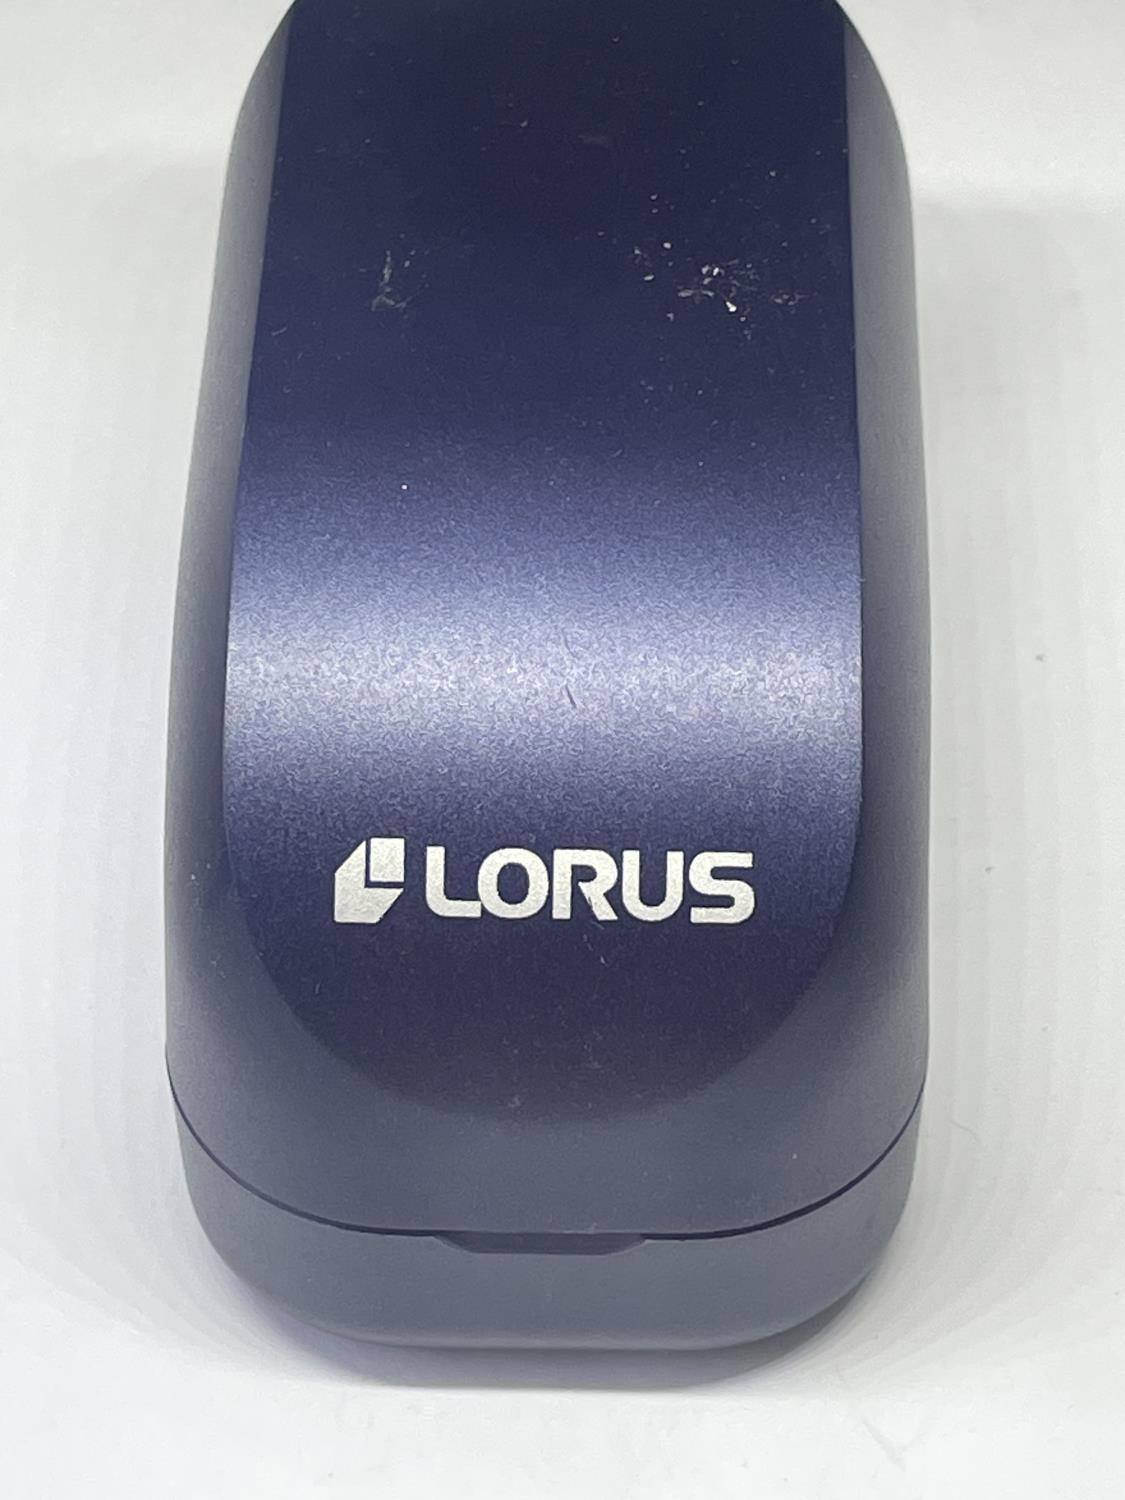 A LORUS WRIST WATCH IN A PRESENTATION BOX SEEN WORKING BUT NO WARRANTY - Image 3 of 3